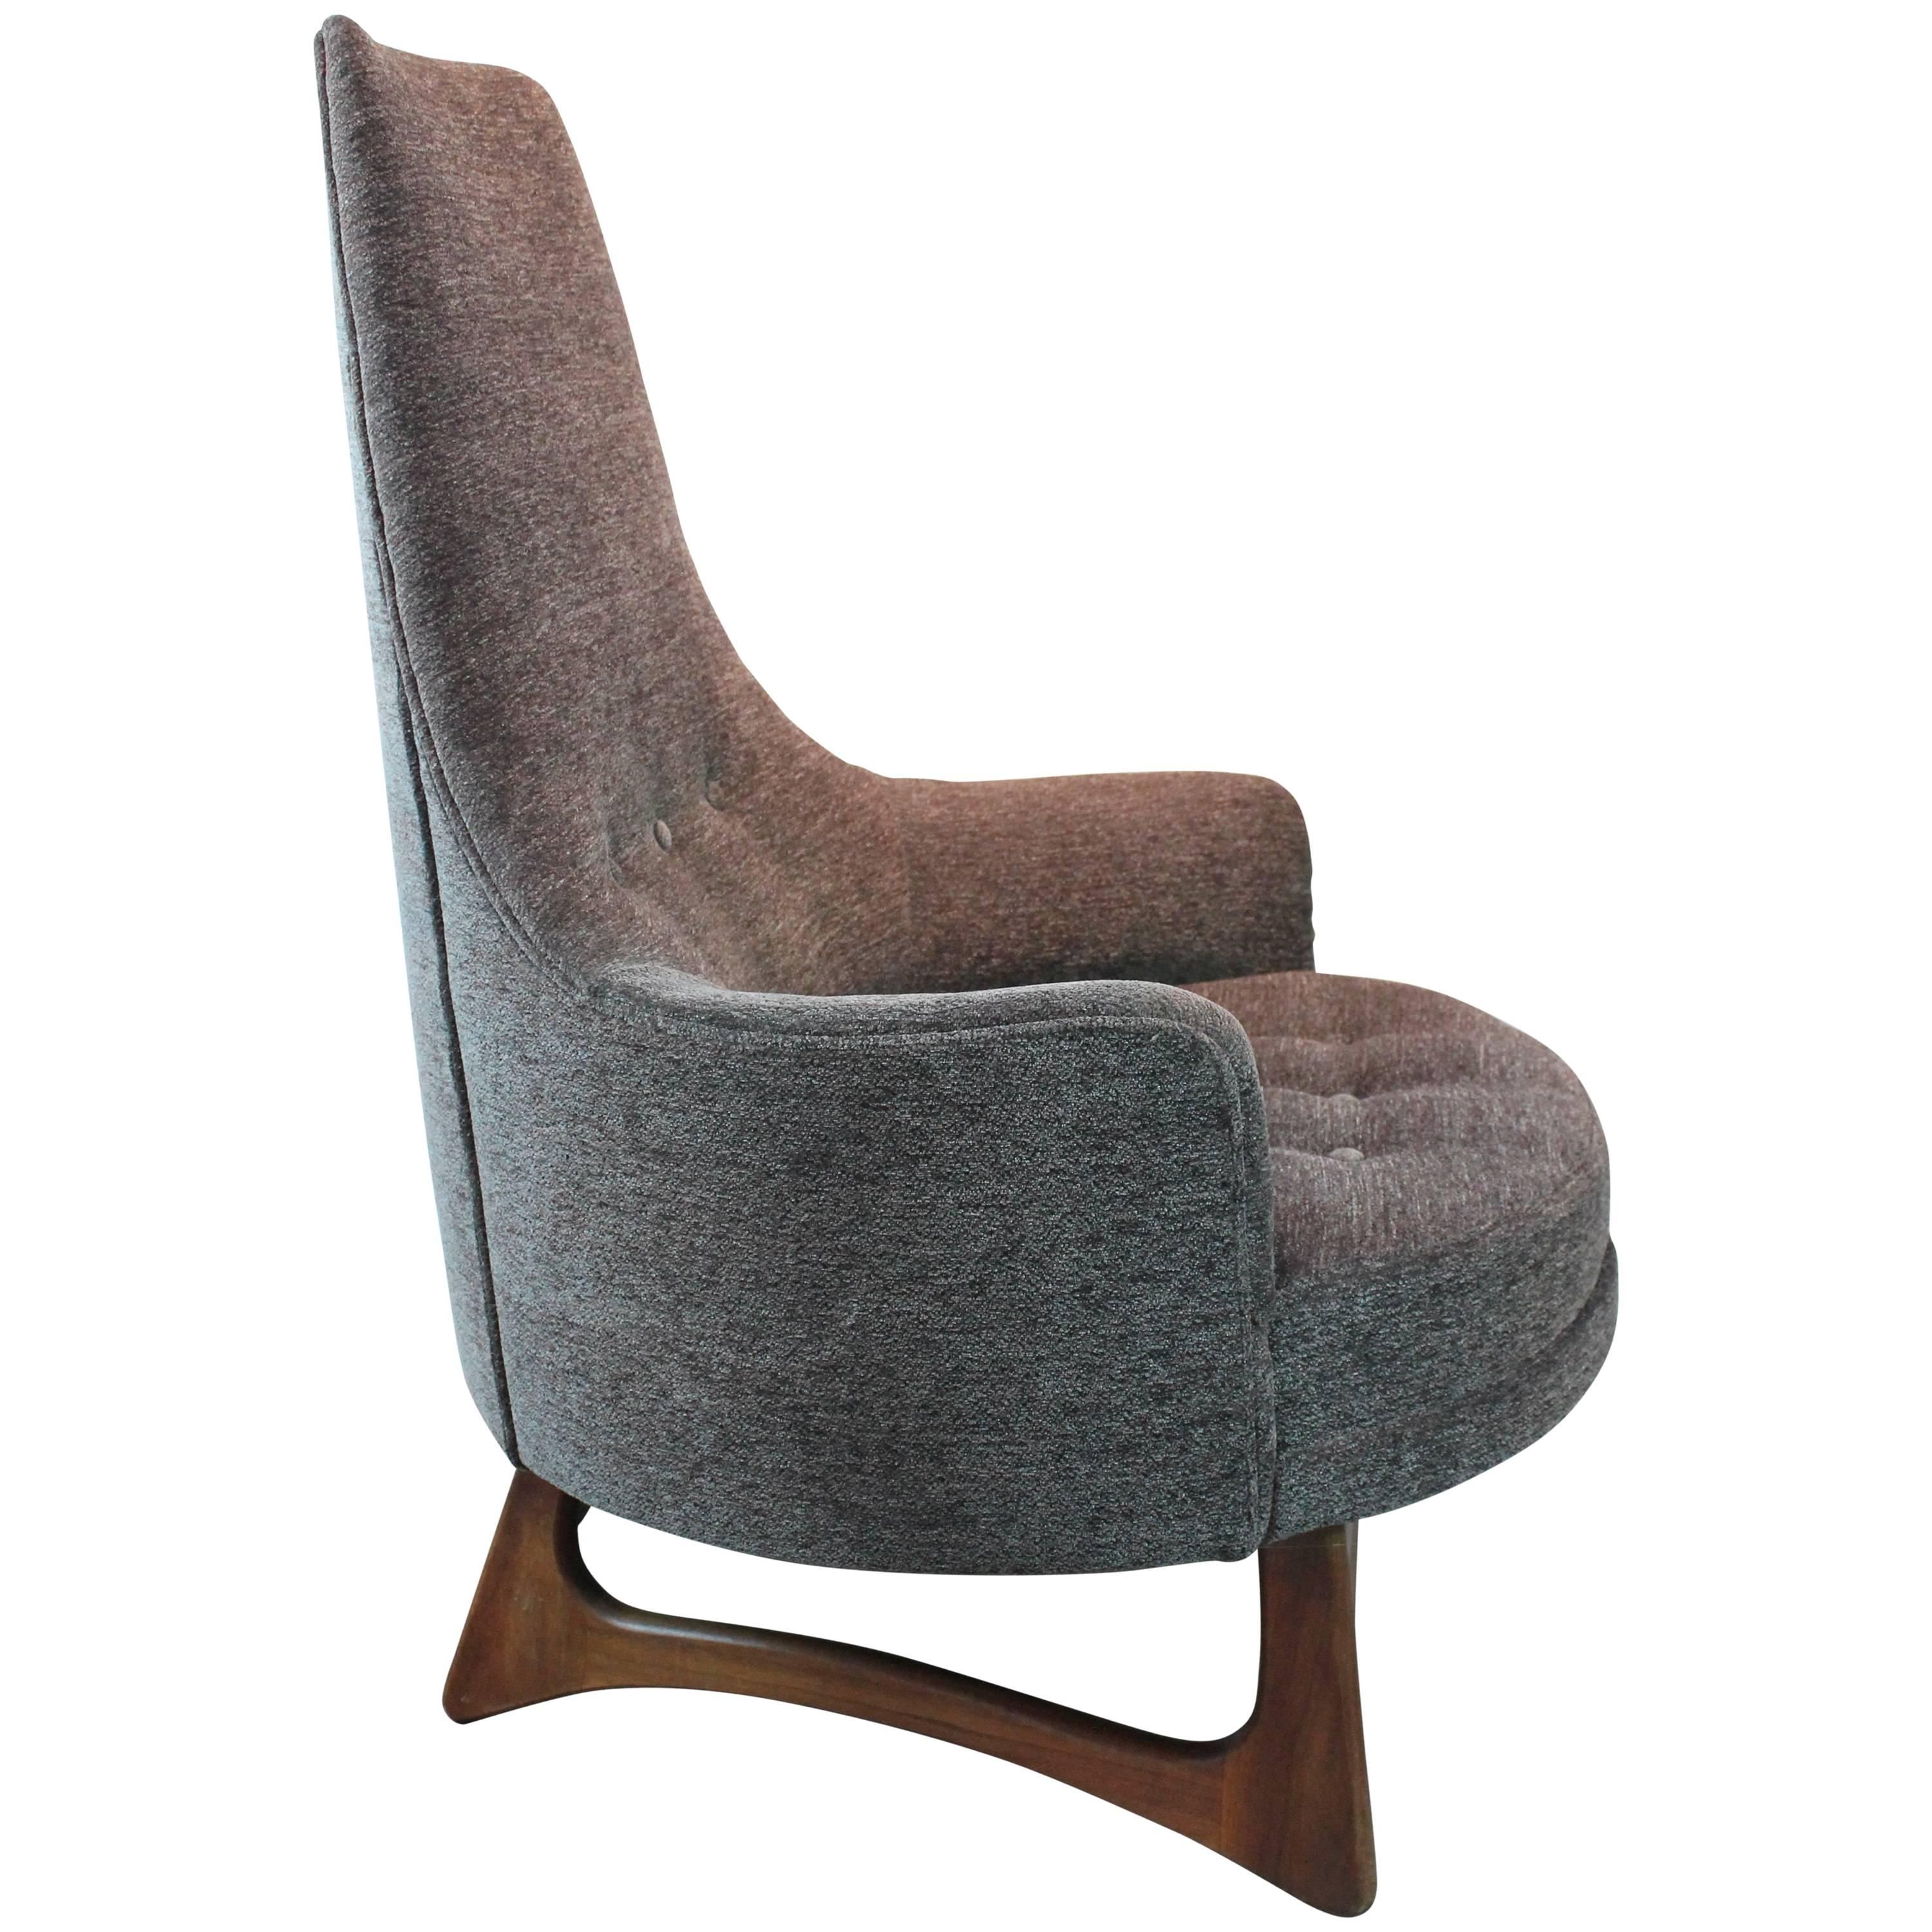 Adrian Pearsall High Backed Lounge Chair